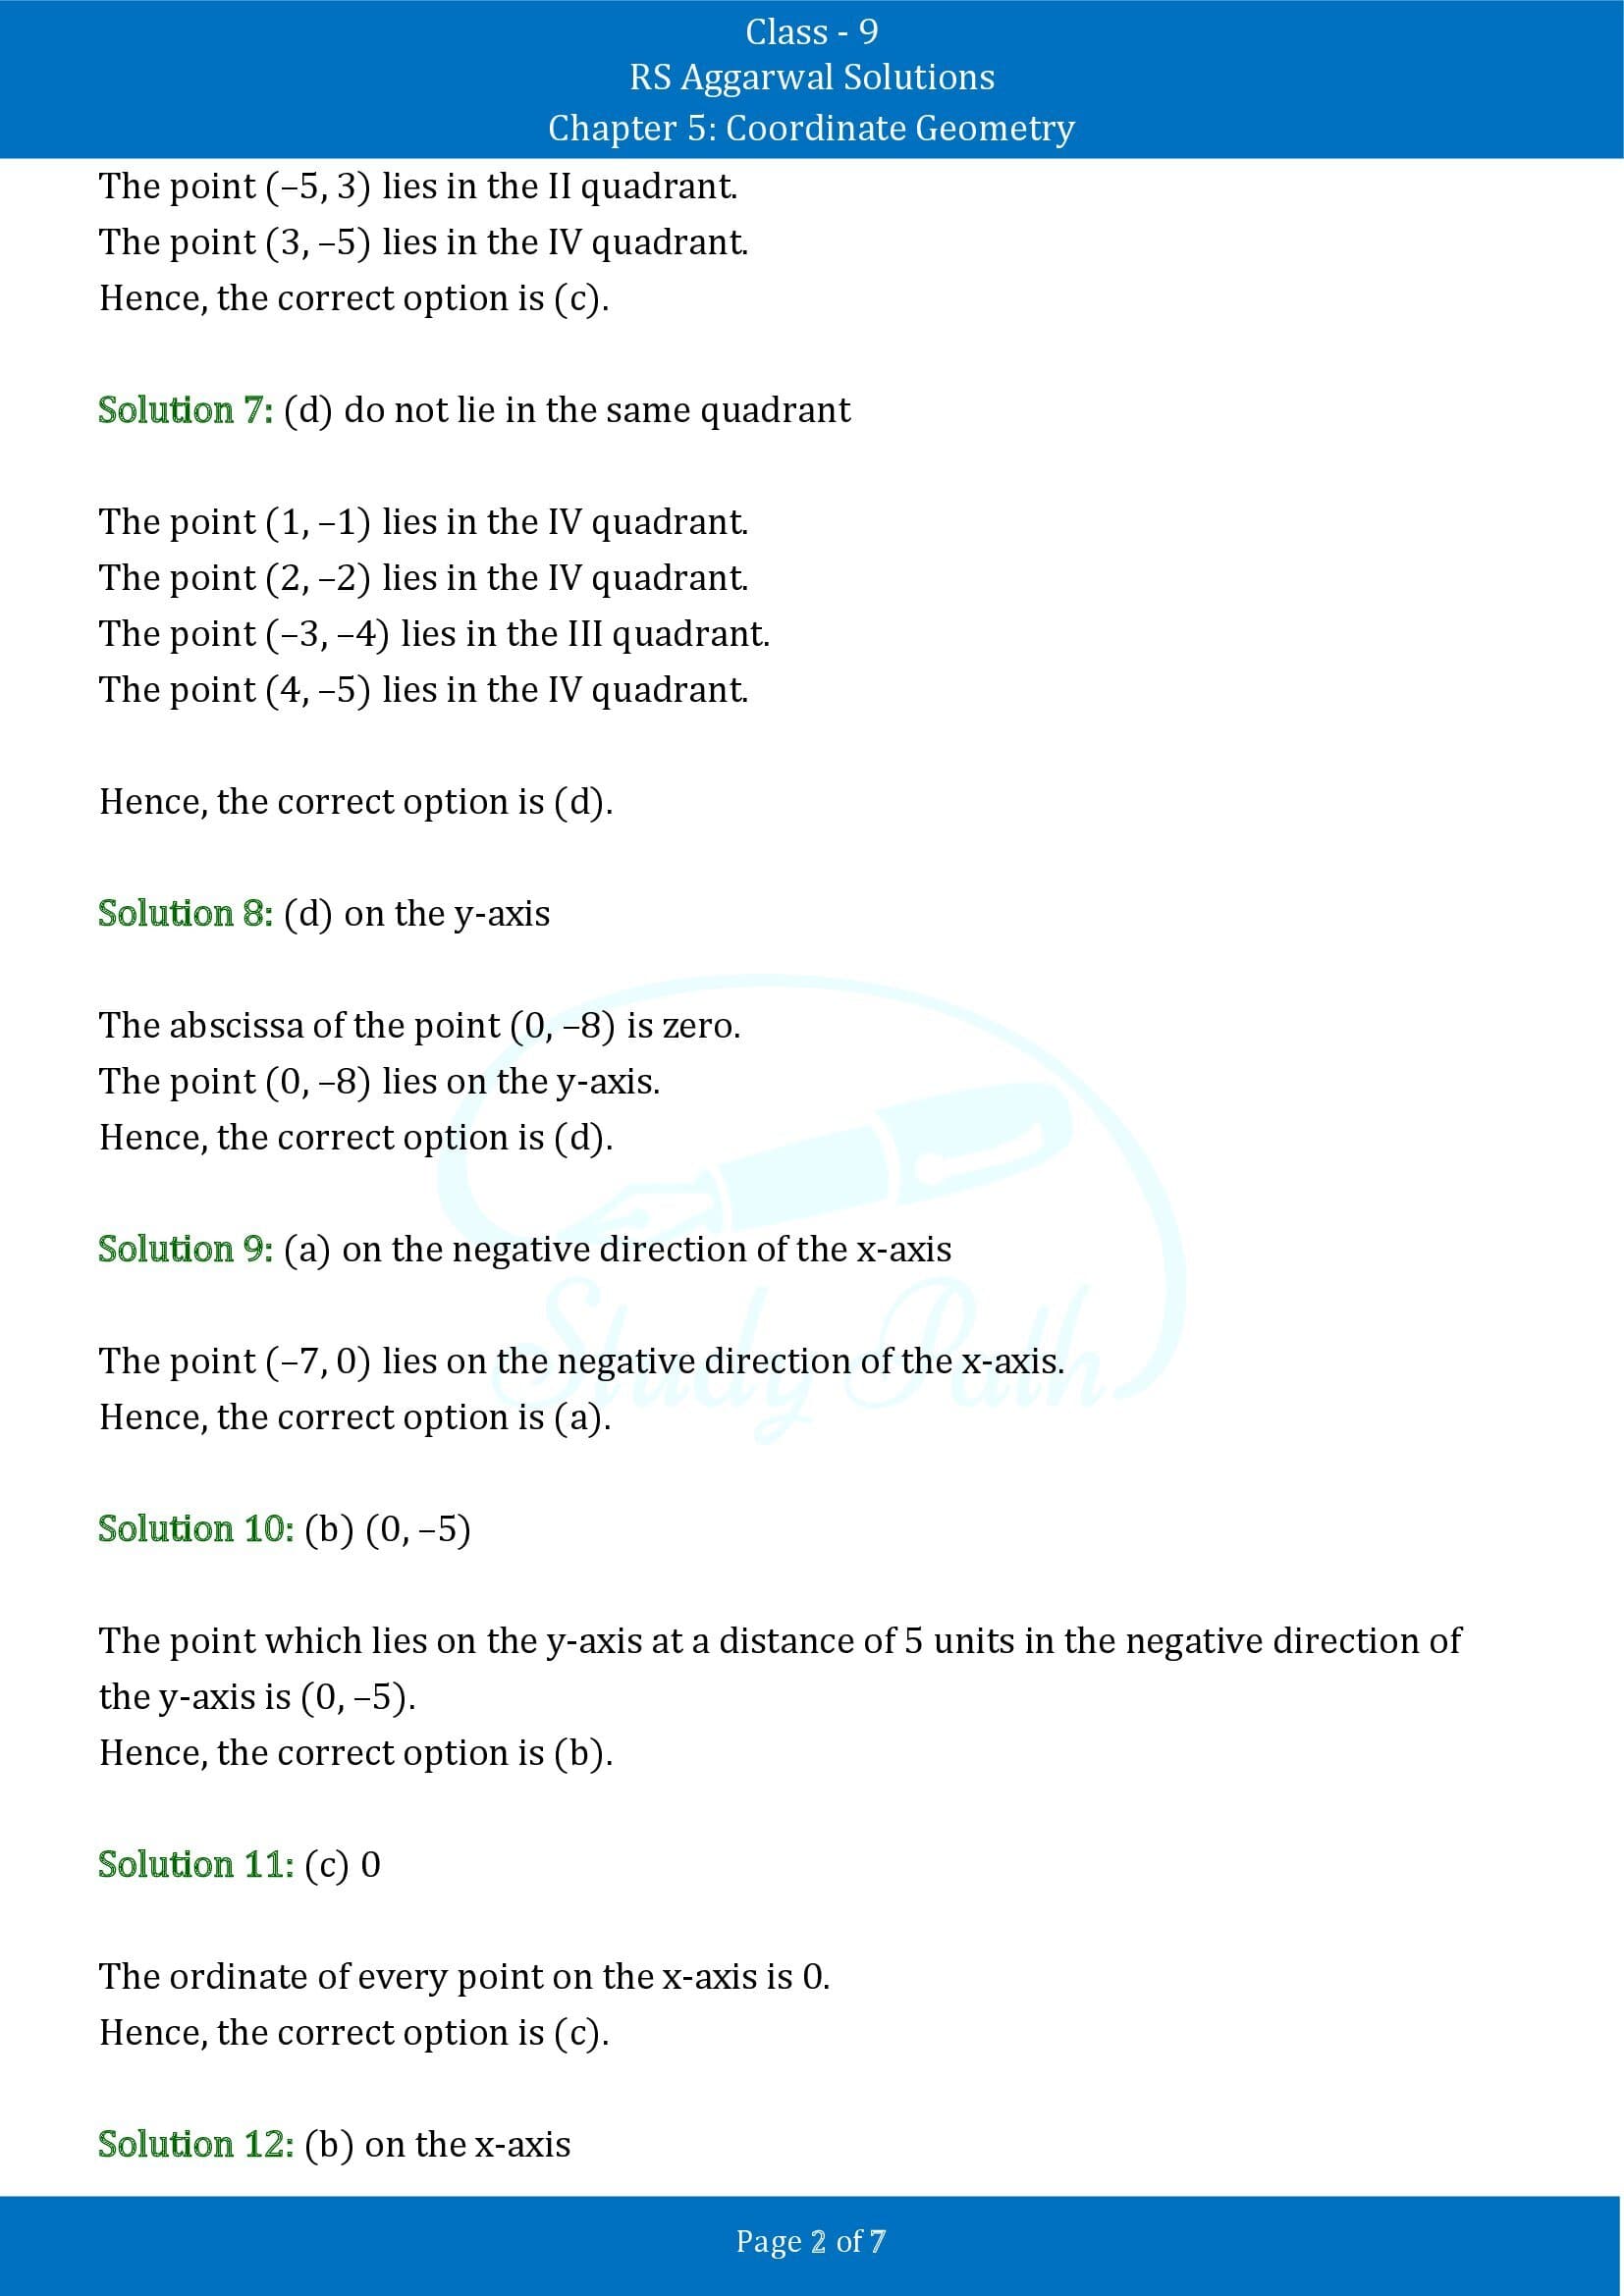 RS Aggarwal Solutions Class 9 Chapter 5 Coordinate Geometry Multiple Choice Questions MCQs 00002